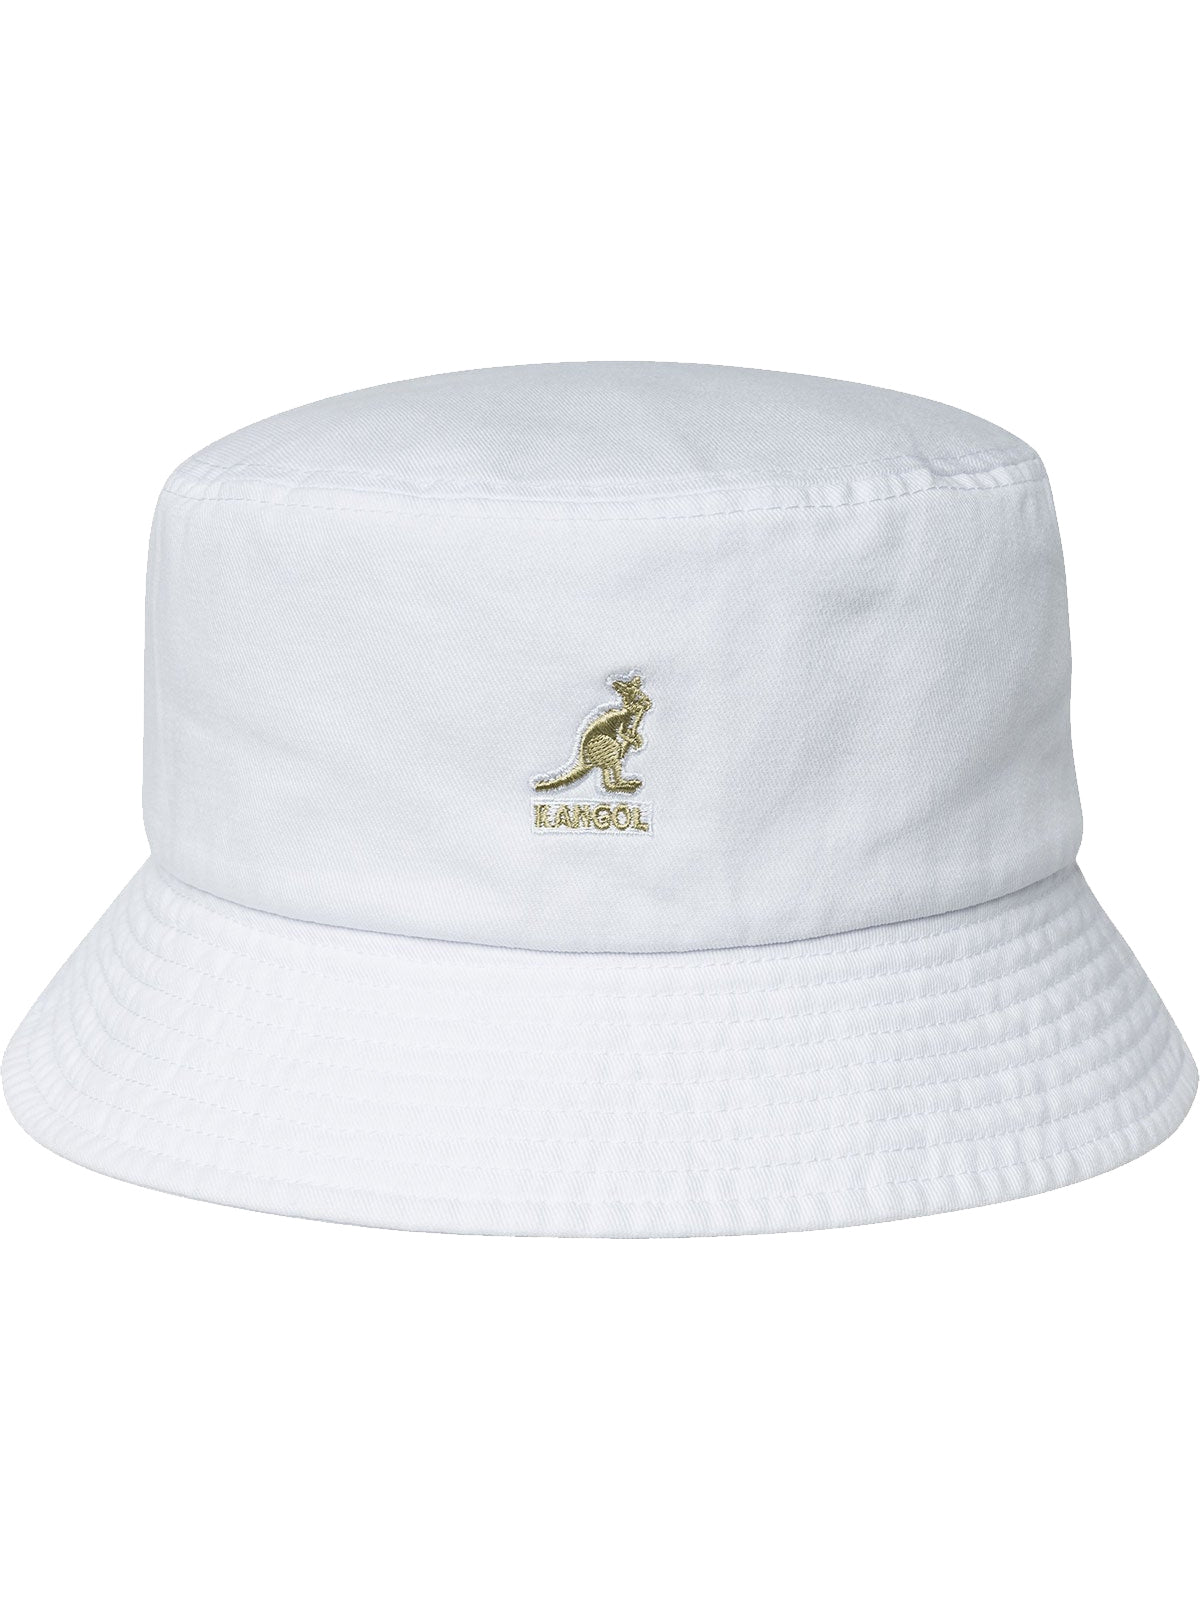 Kangol Washed Cotton Bucket Hat in White